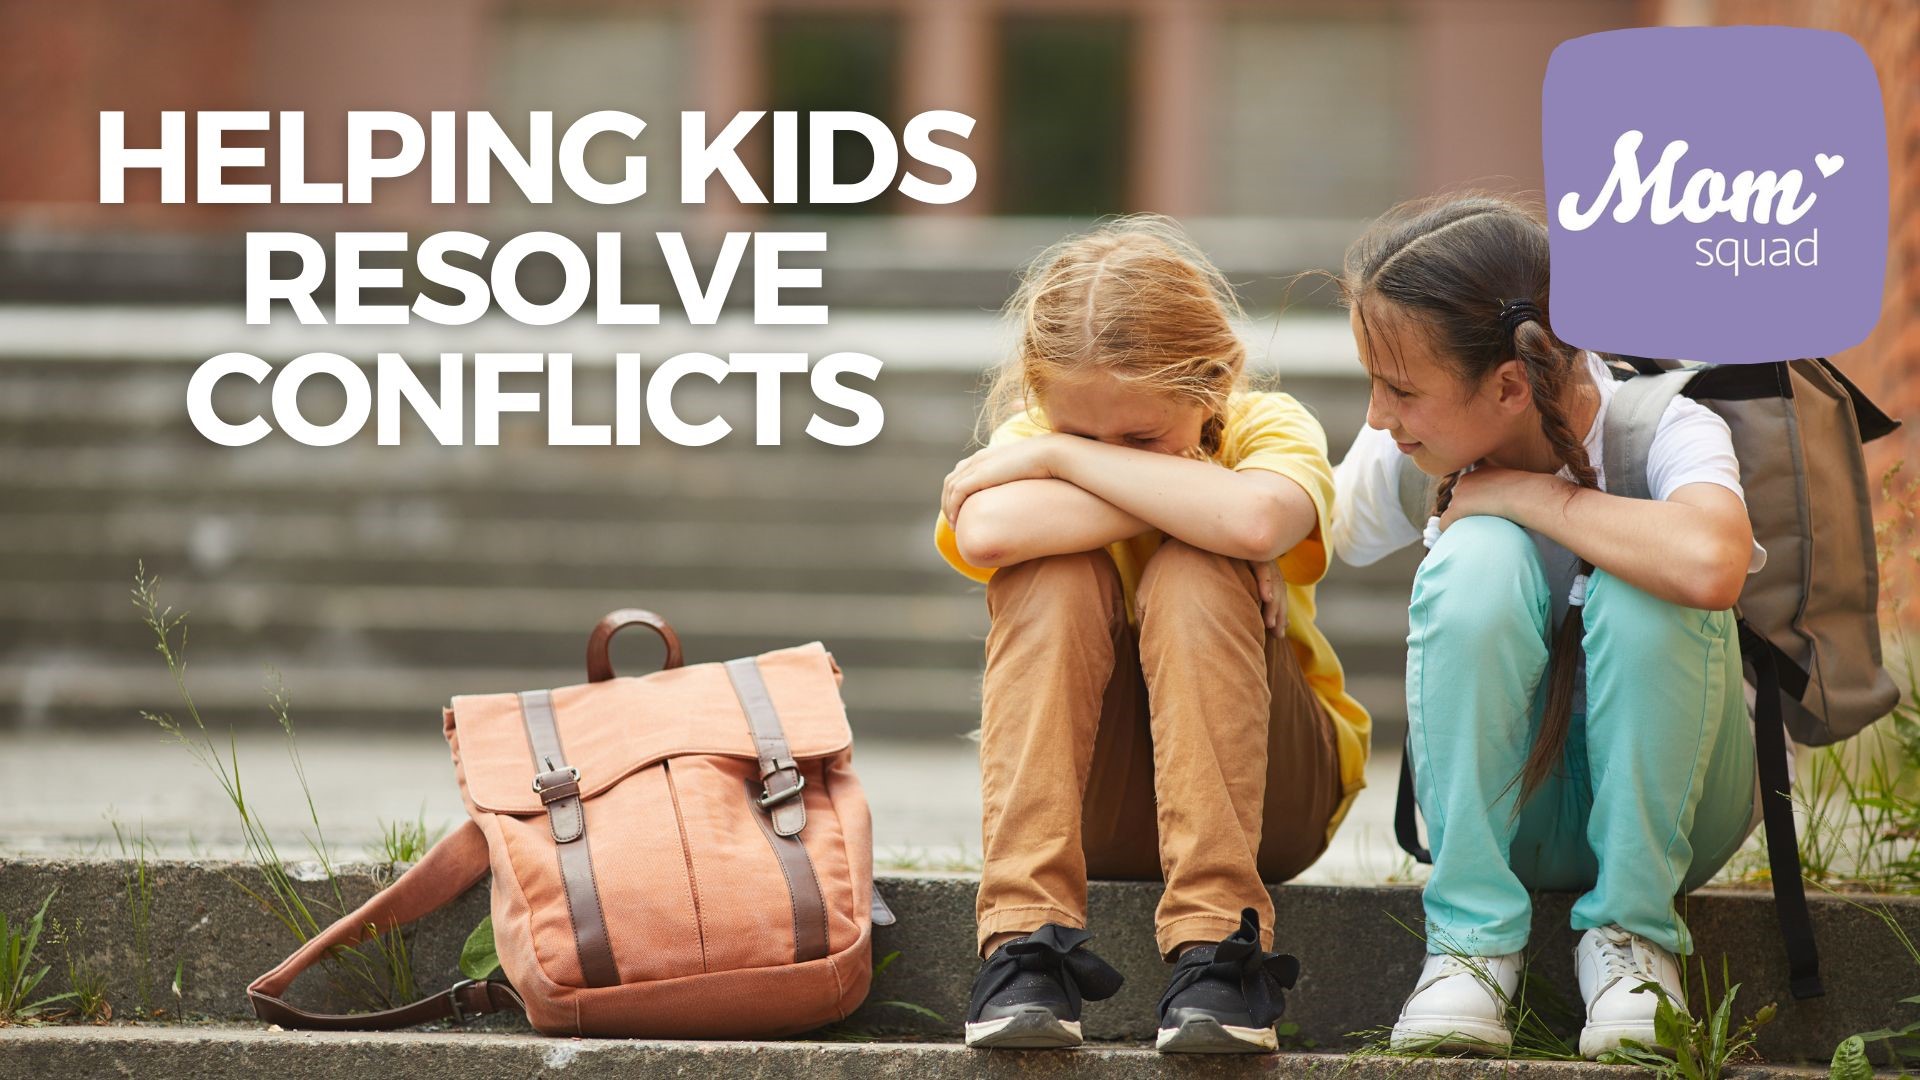 Maureen Kyle talks with an expert and moms about guiding their kids through resolving conflicts.